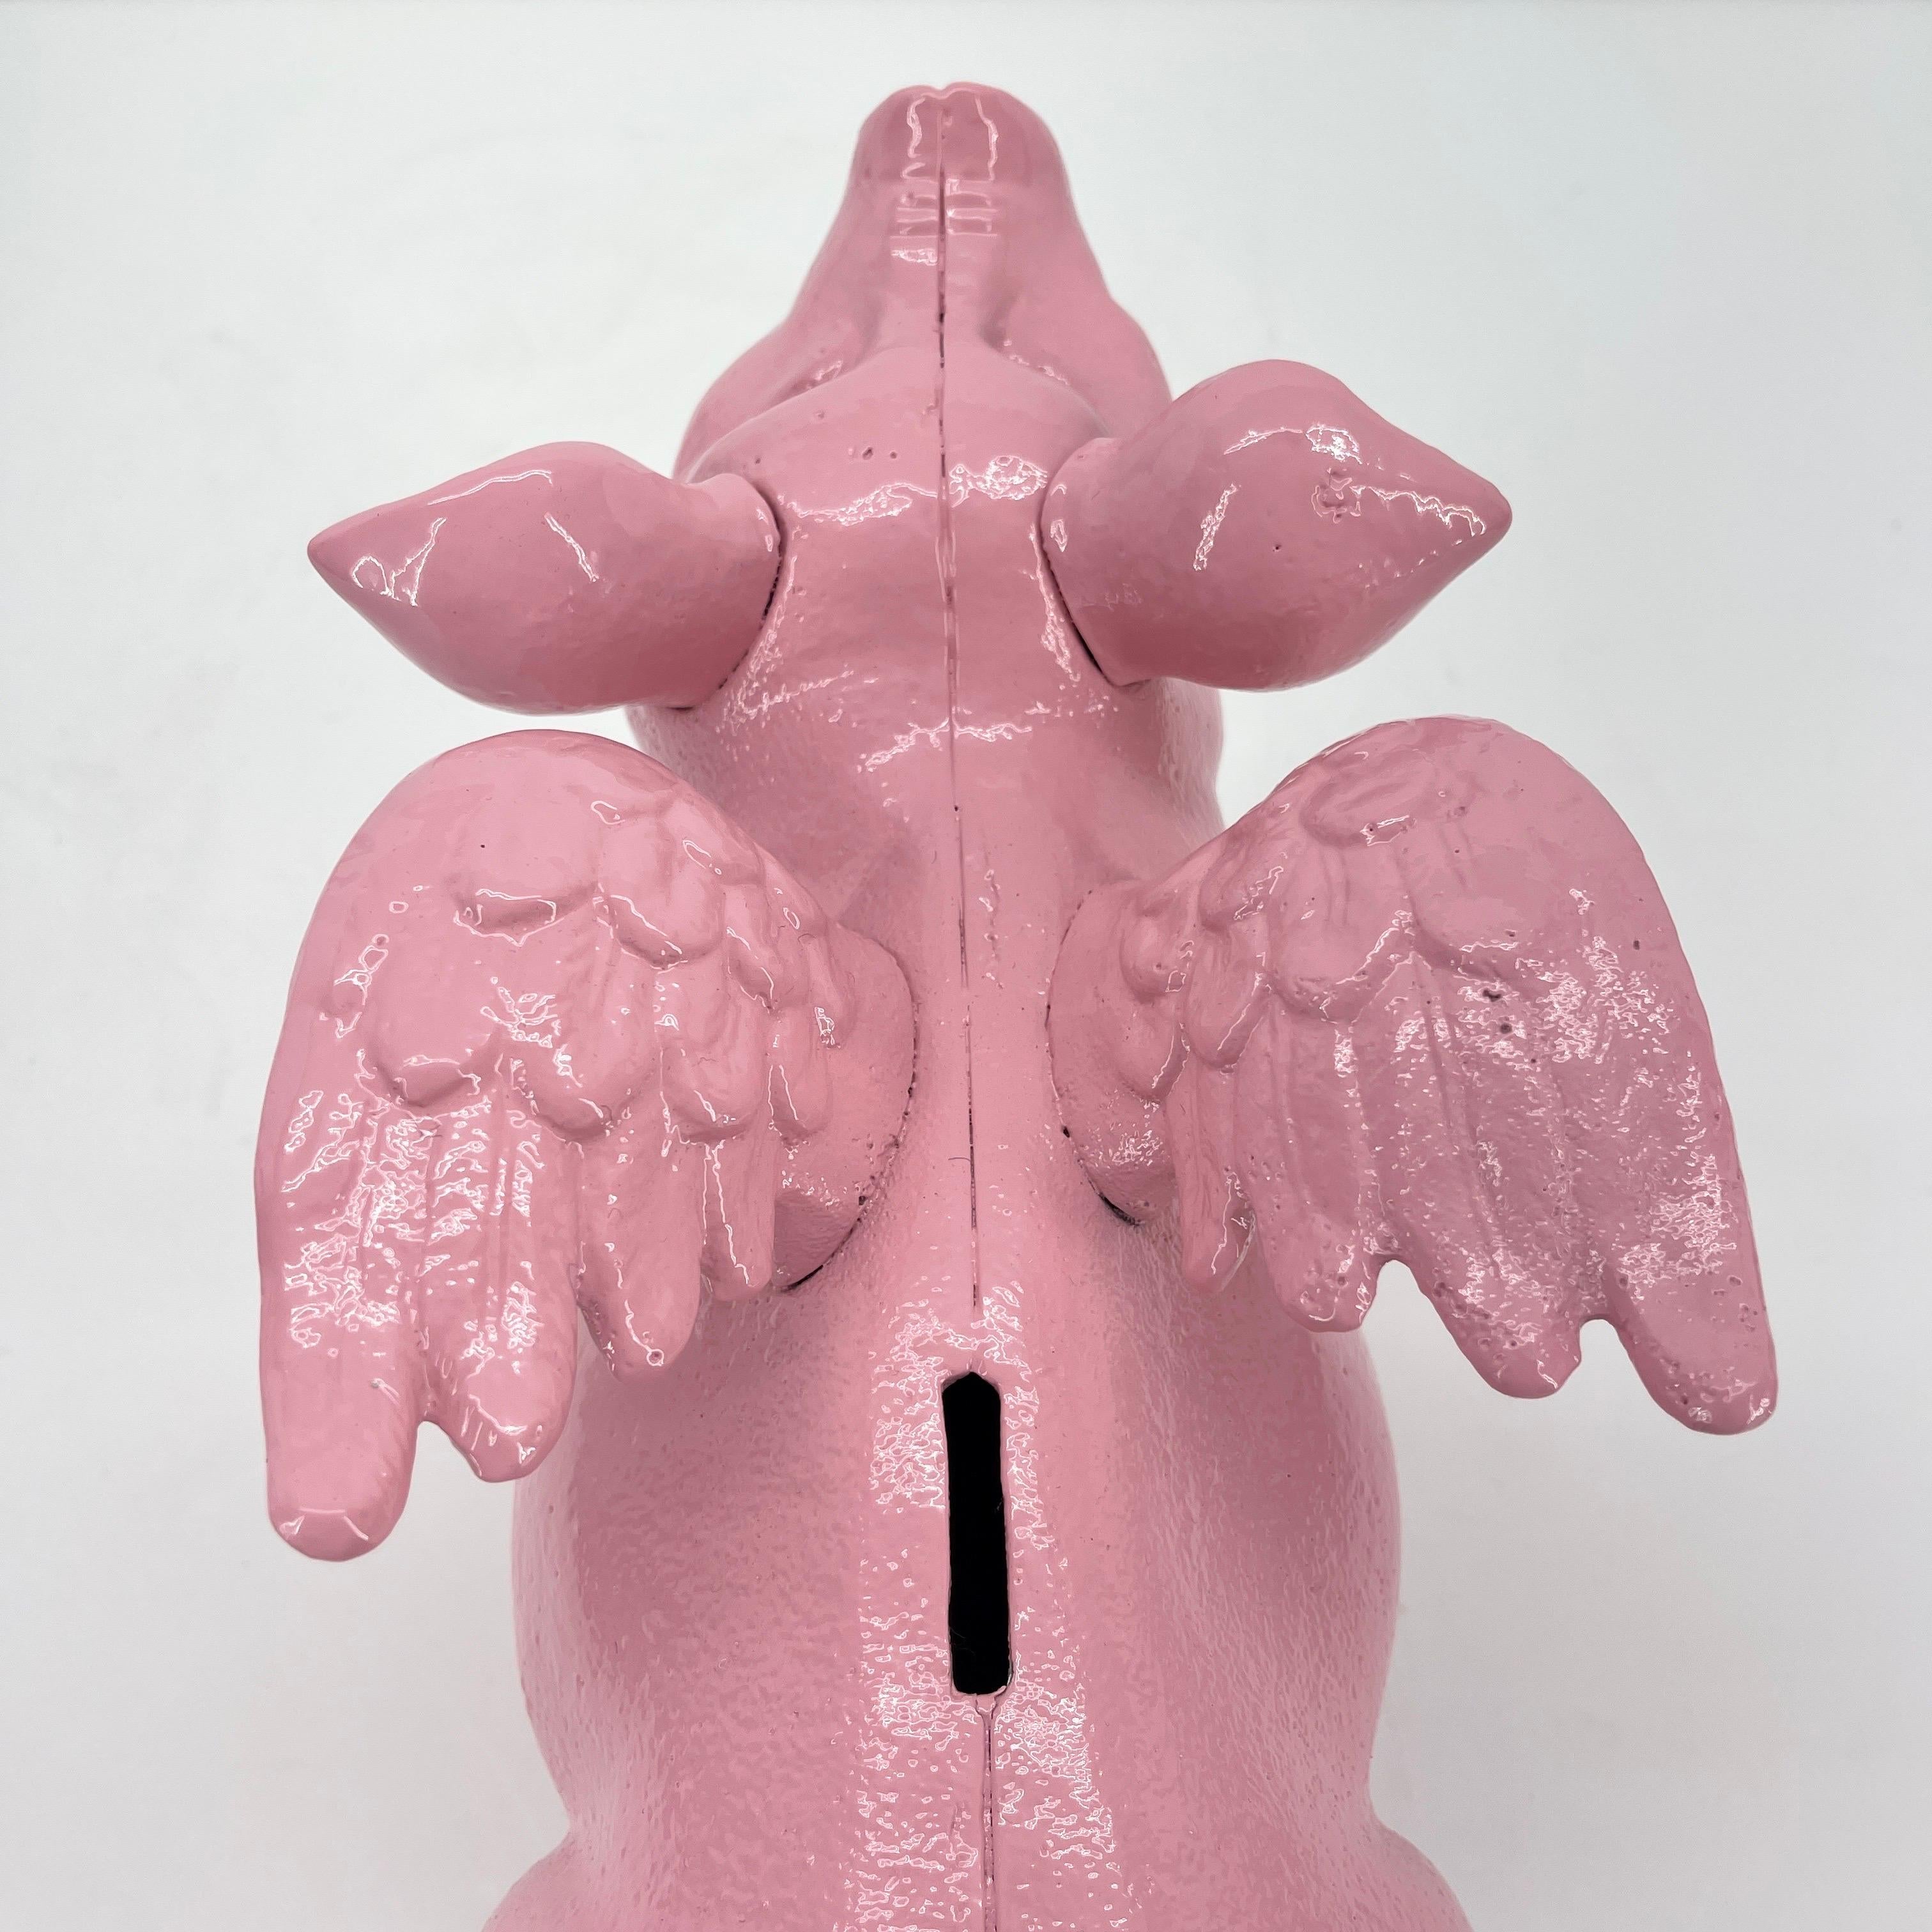 Large Pink Cast Iron Pig Money Bank or Doorstop with Wings, Denmark 1